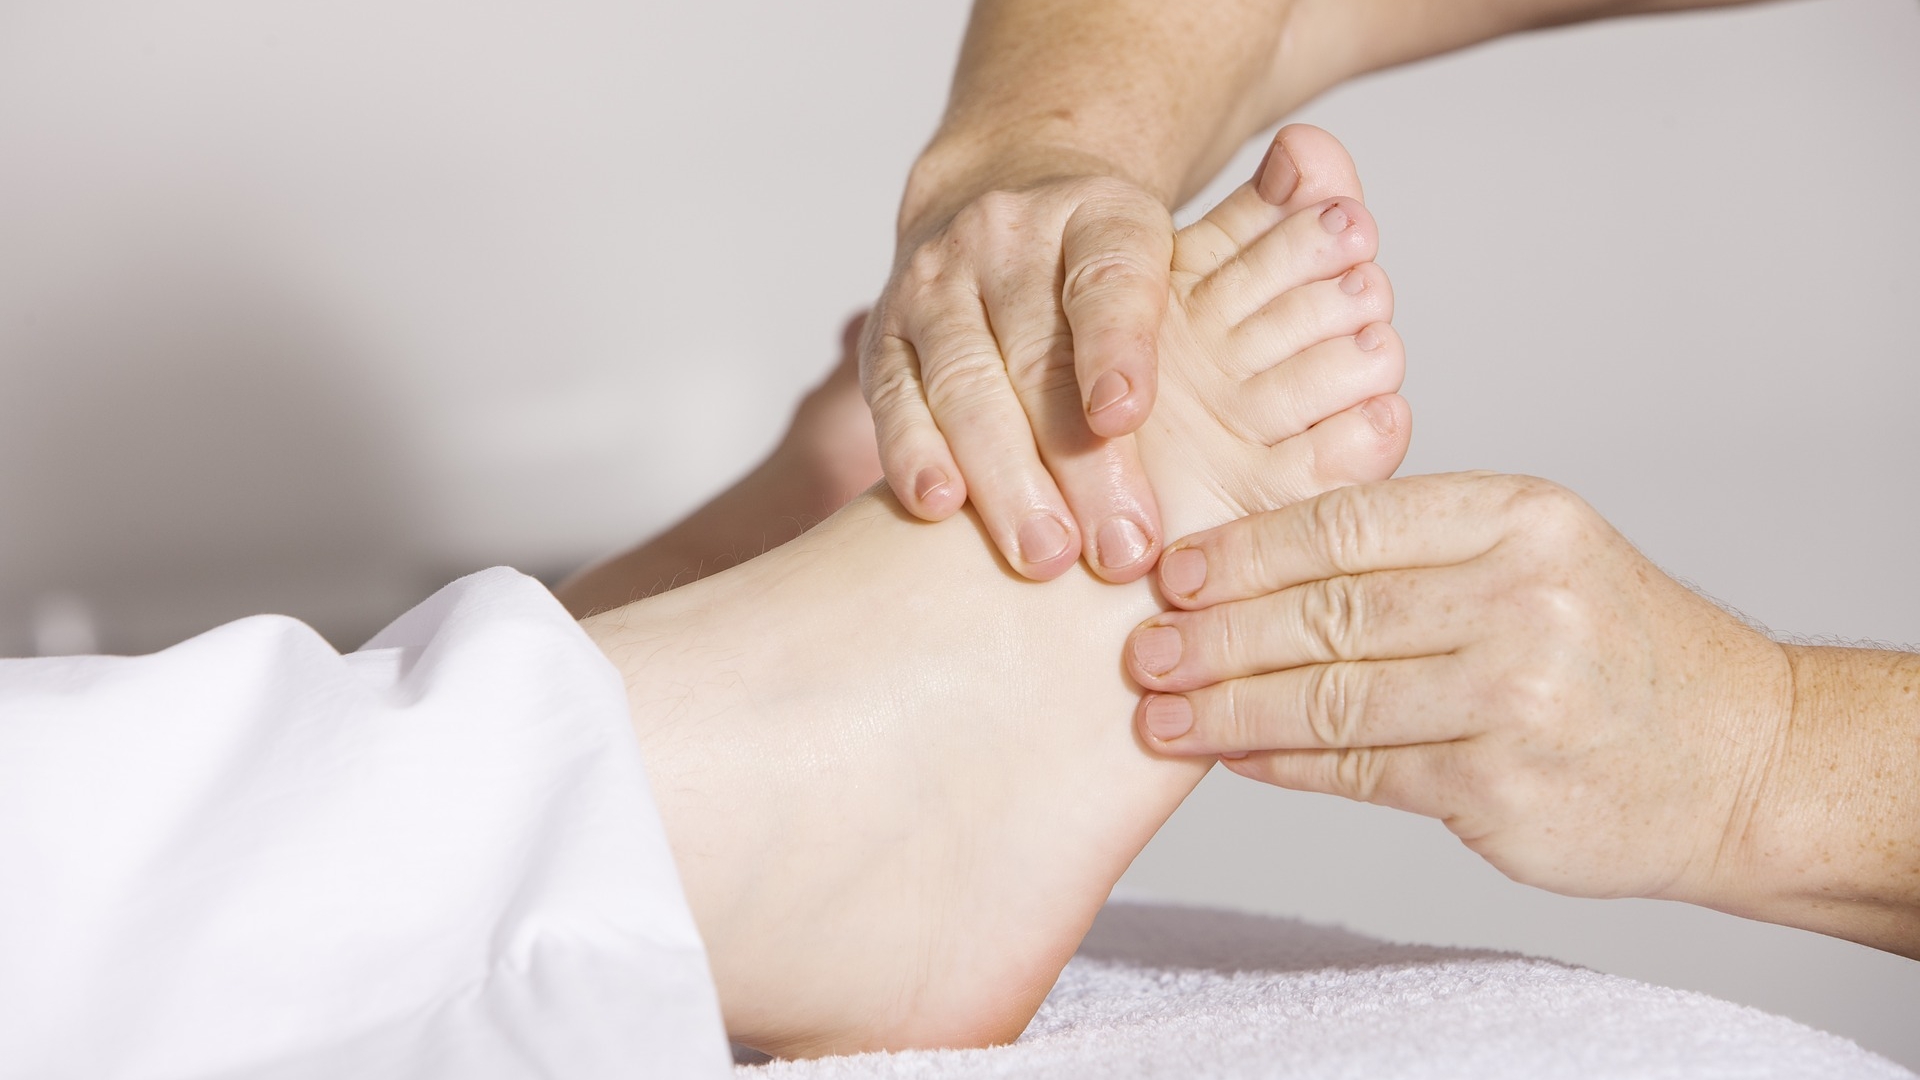 physiotherapy-2133286_1920